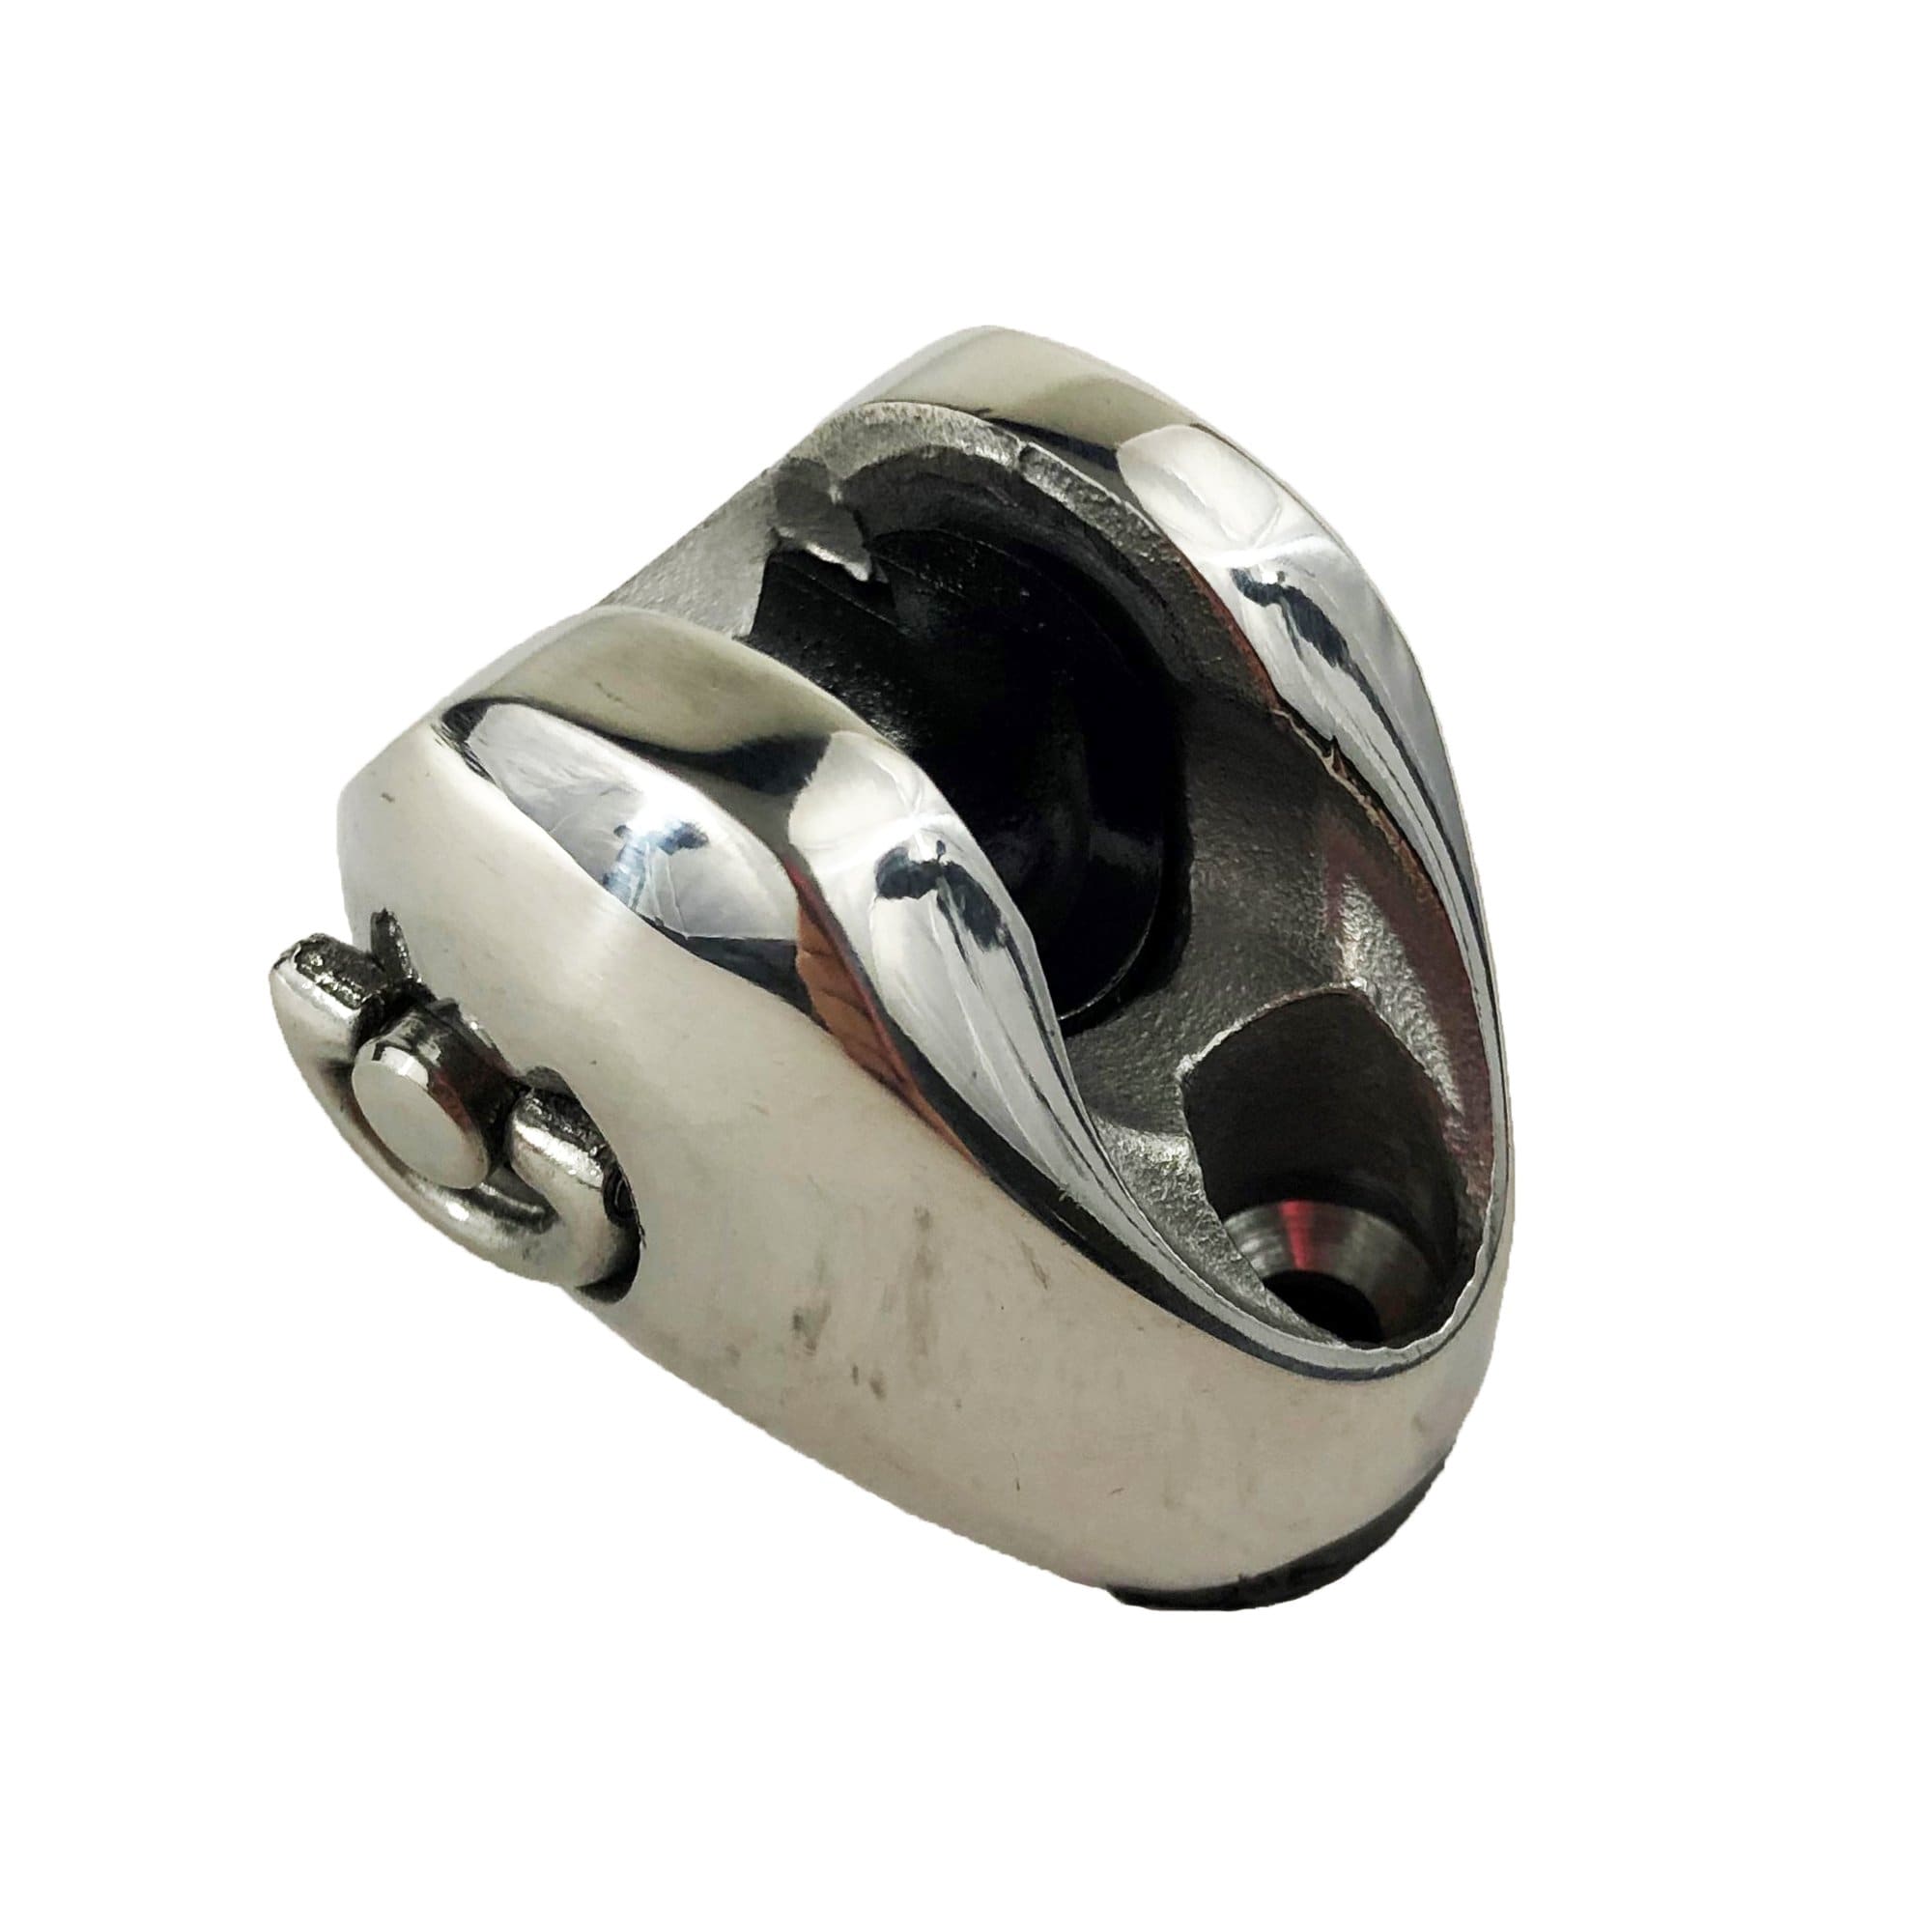 Taco Marine F13-1085S Stainless Steel Ball & Socket Deck Hinge, D-Ring, Starboard